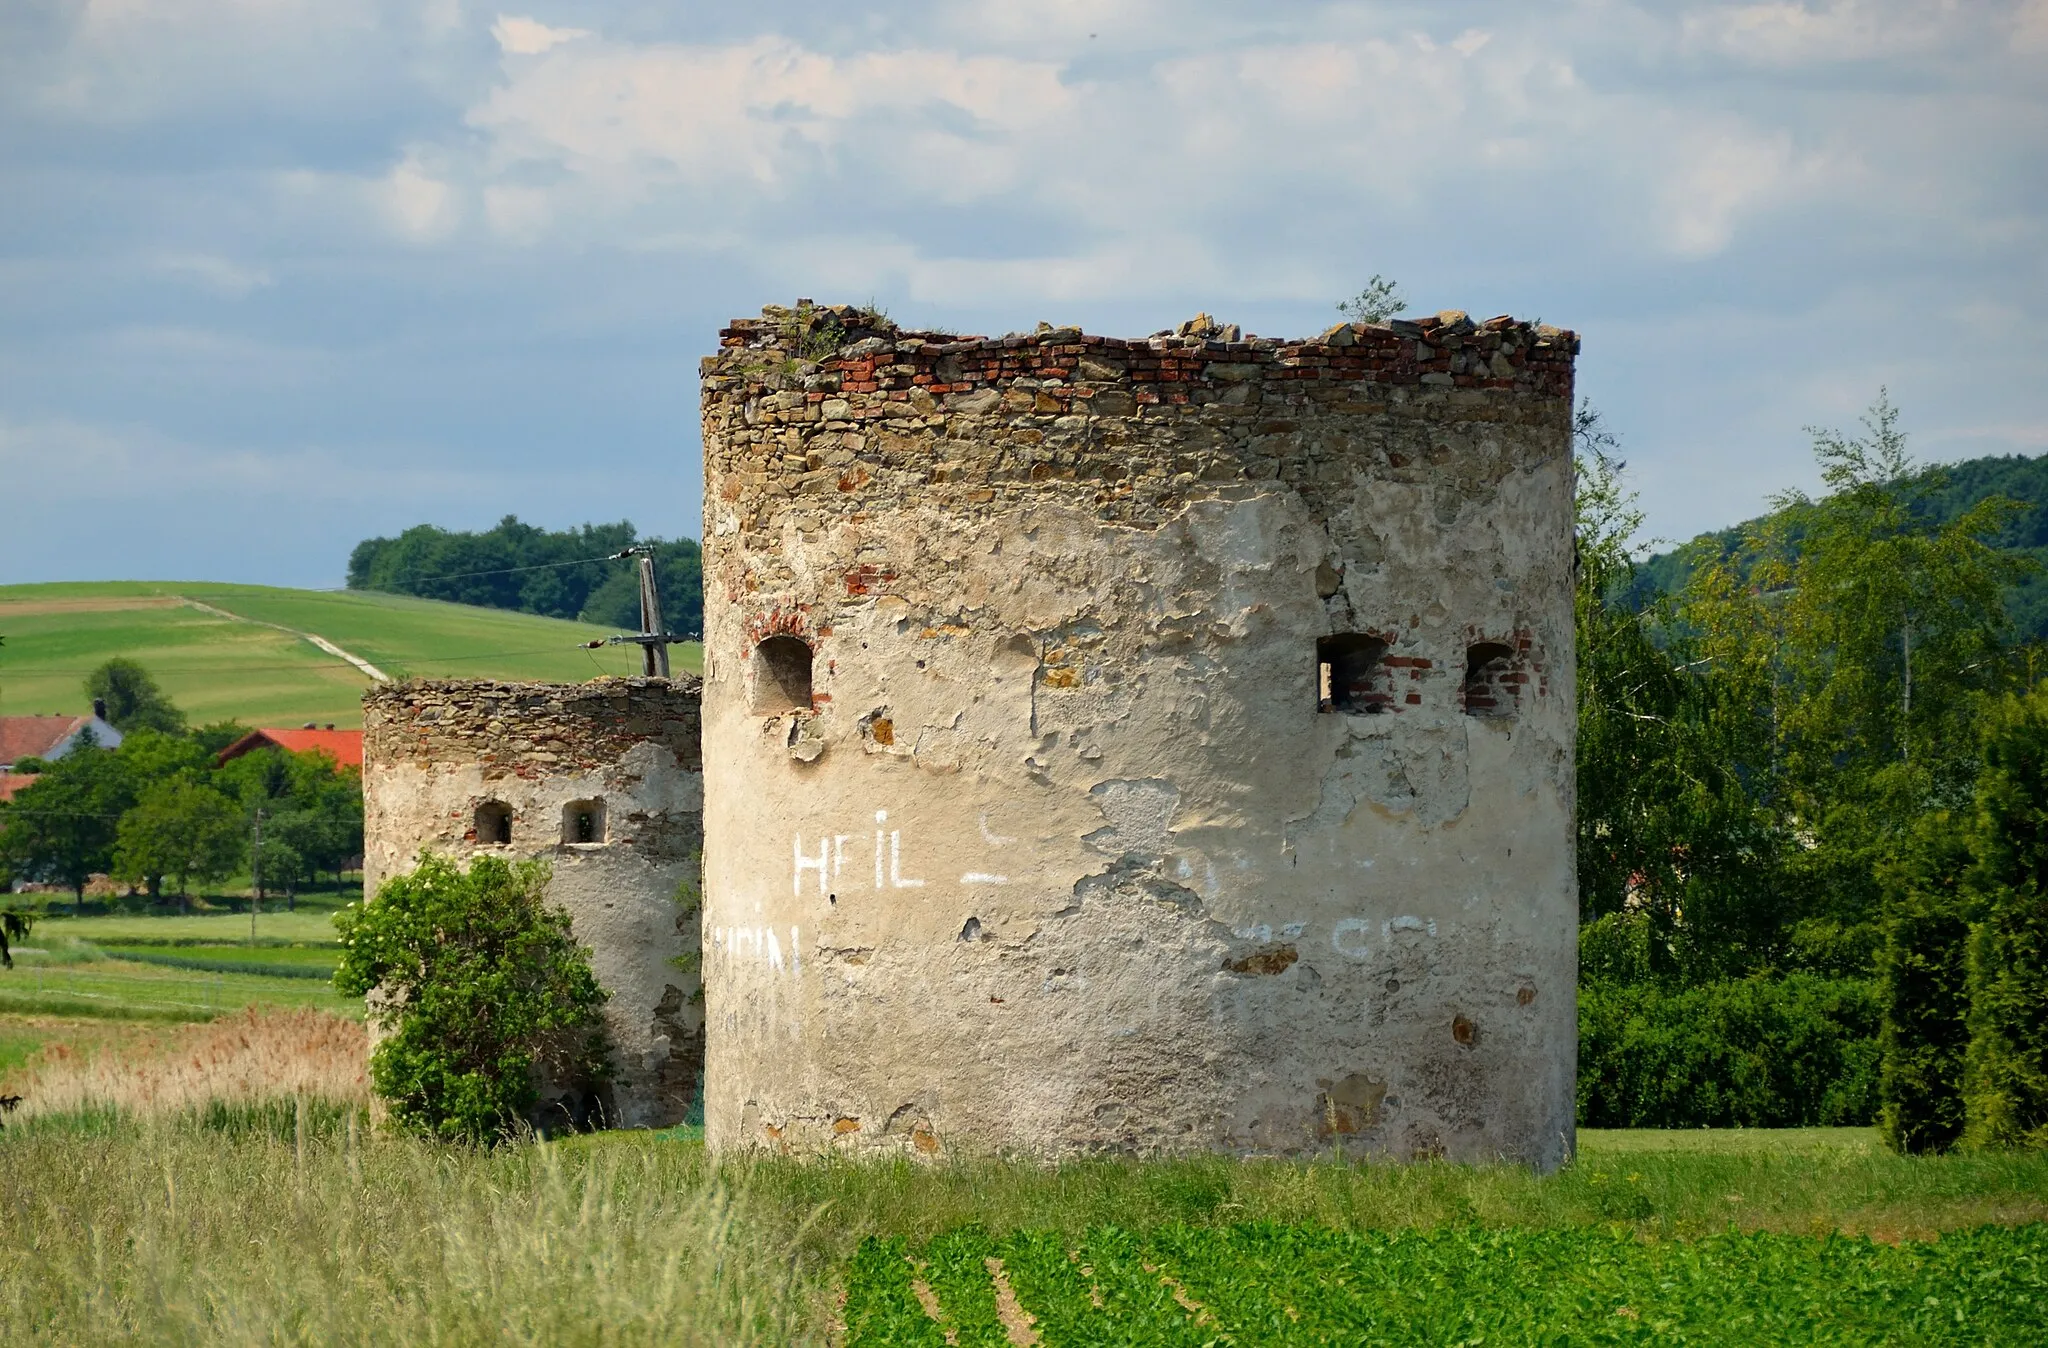 Photo showing: The ruins of castle Raipoltenbach, municipality of Neulengbach, Lower Austria, is protected as a cultural heritage monument.